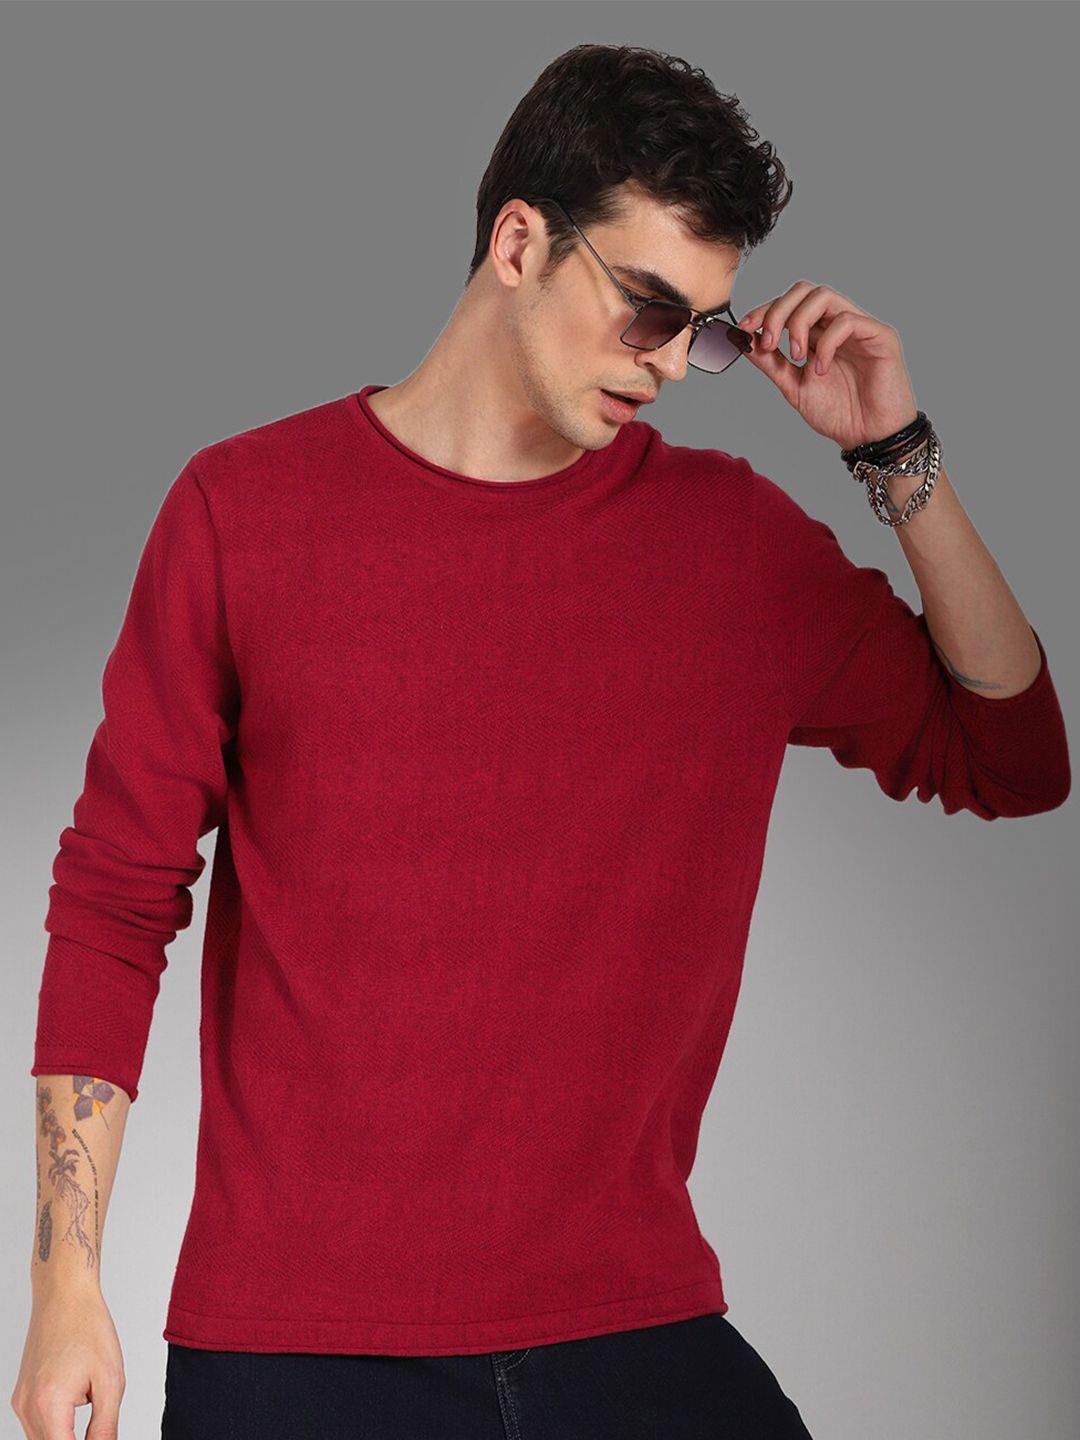 high star round neck long sleeves cotton pullover sweater